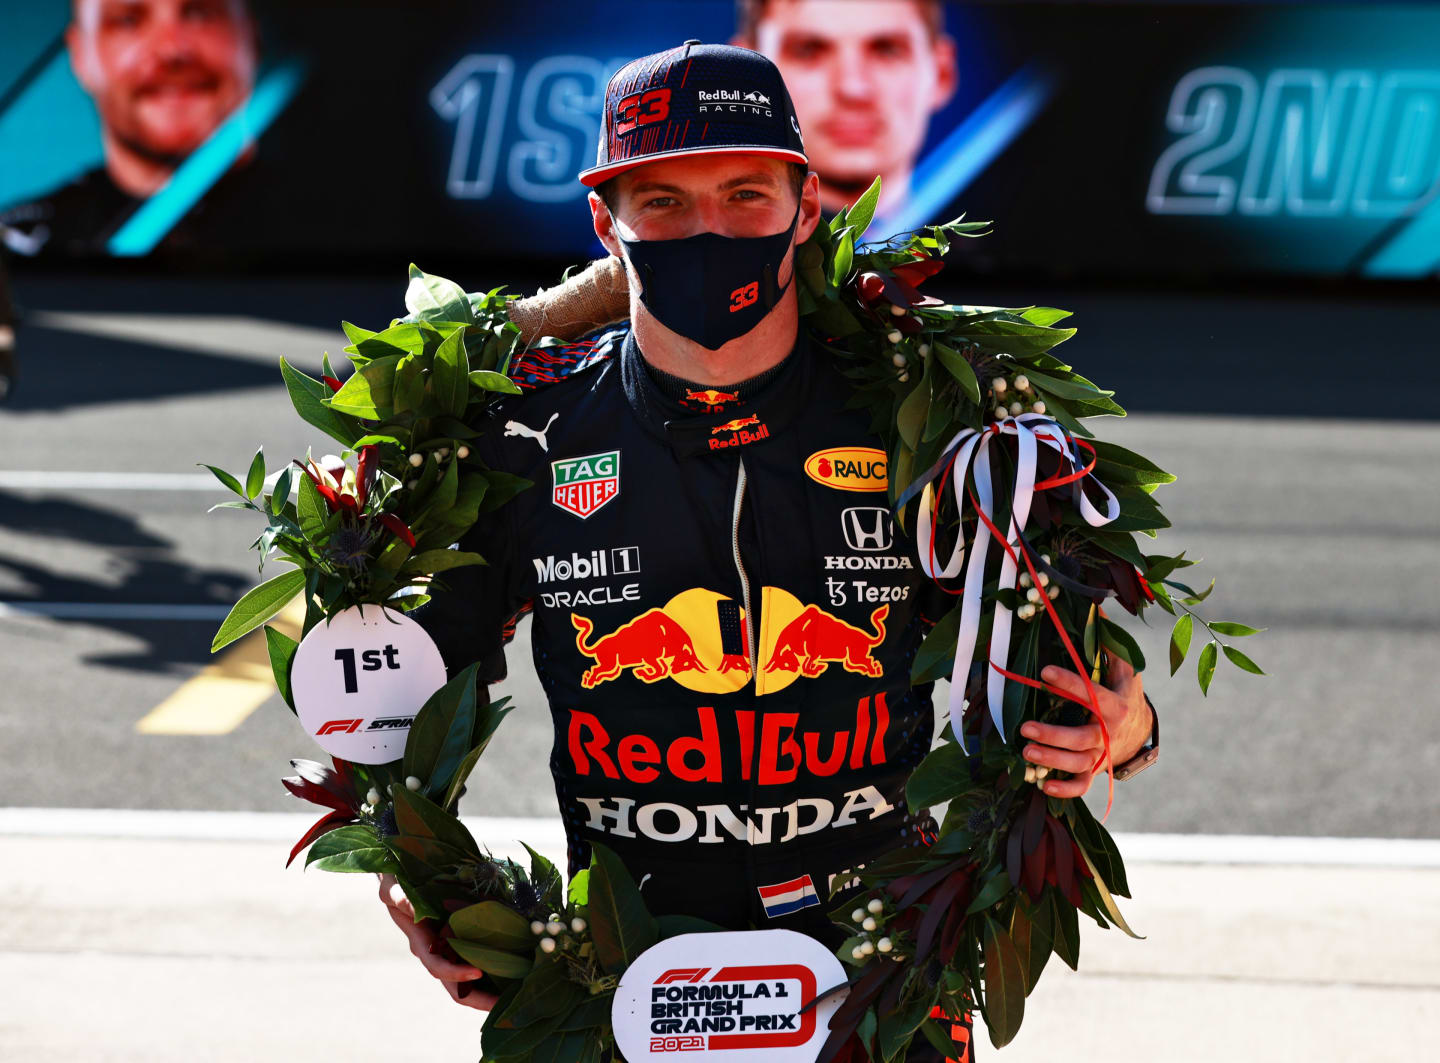 NORTHAMPTON, ENGLAND - JULY 17: Winner Max Verstappen of Netherlands and Red Bull Racing celebrates